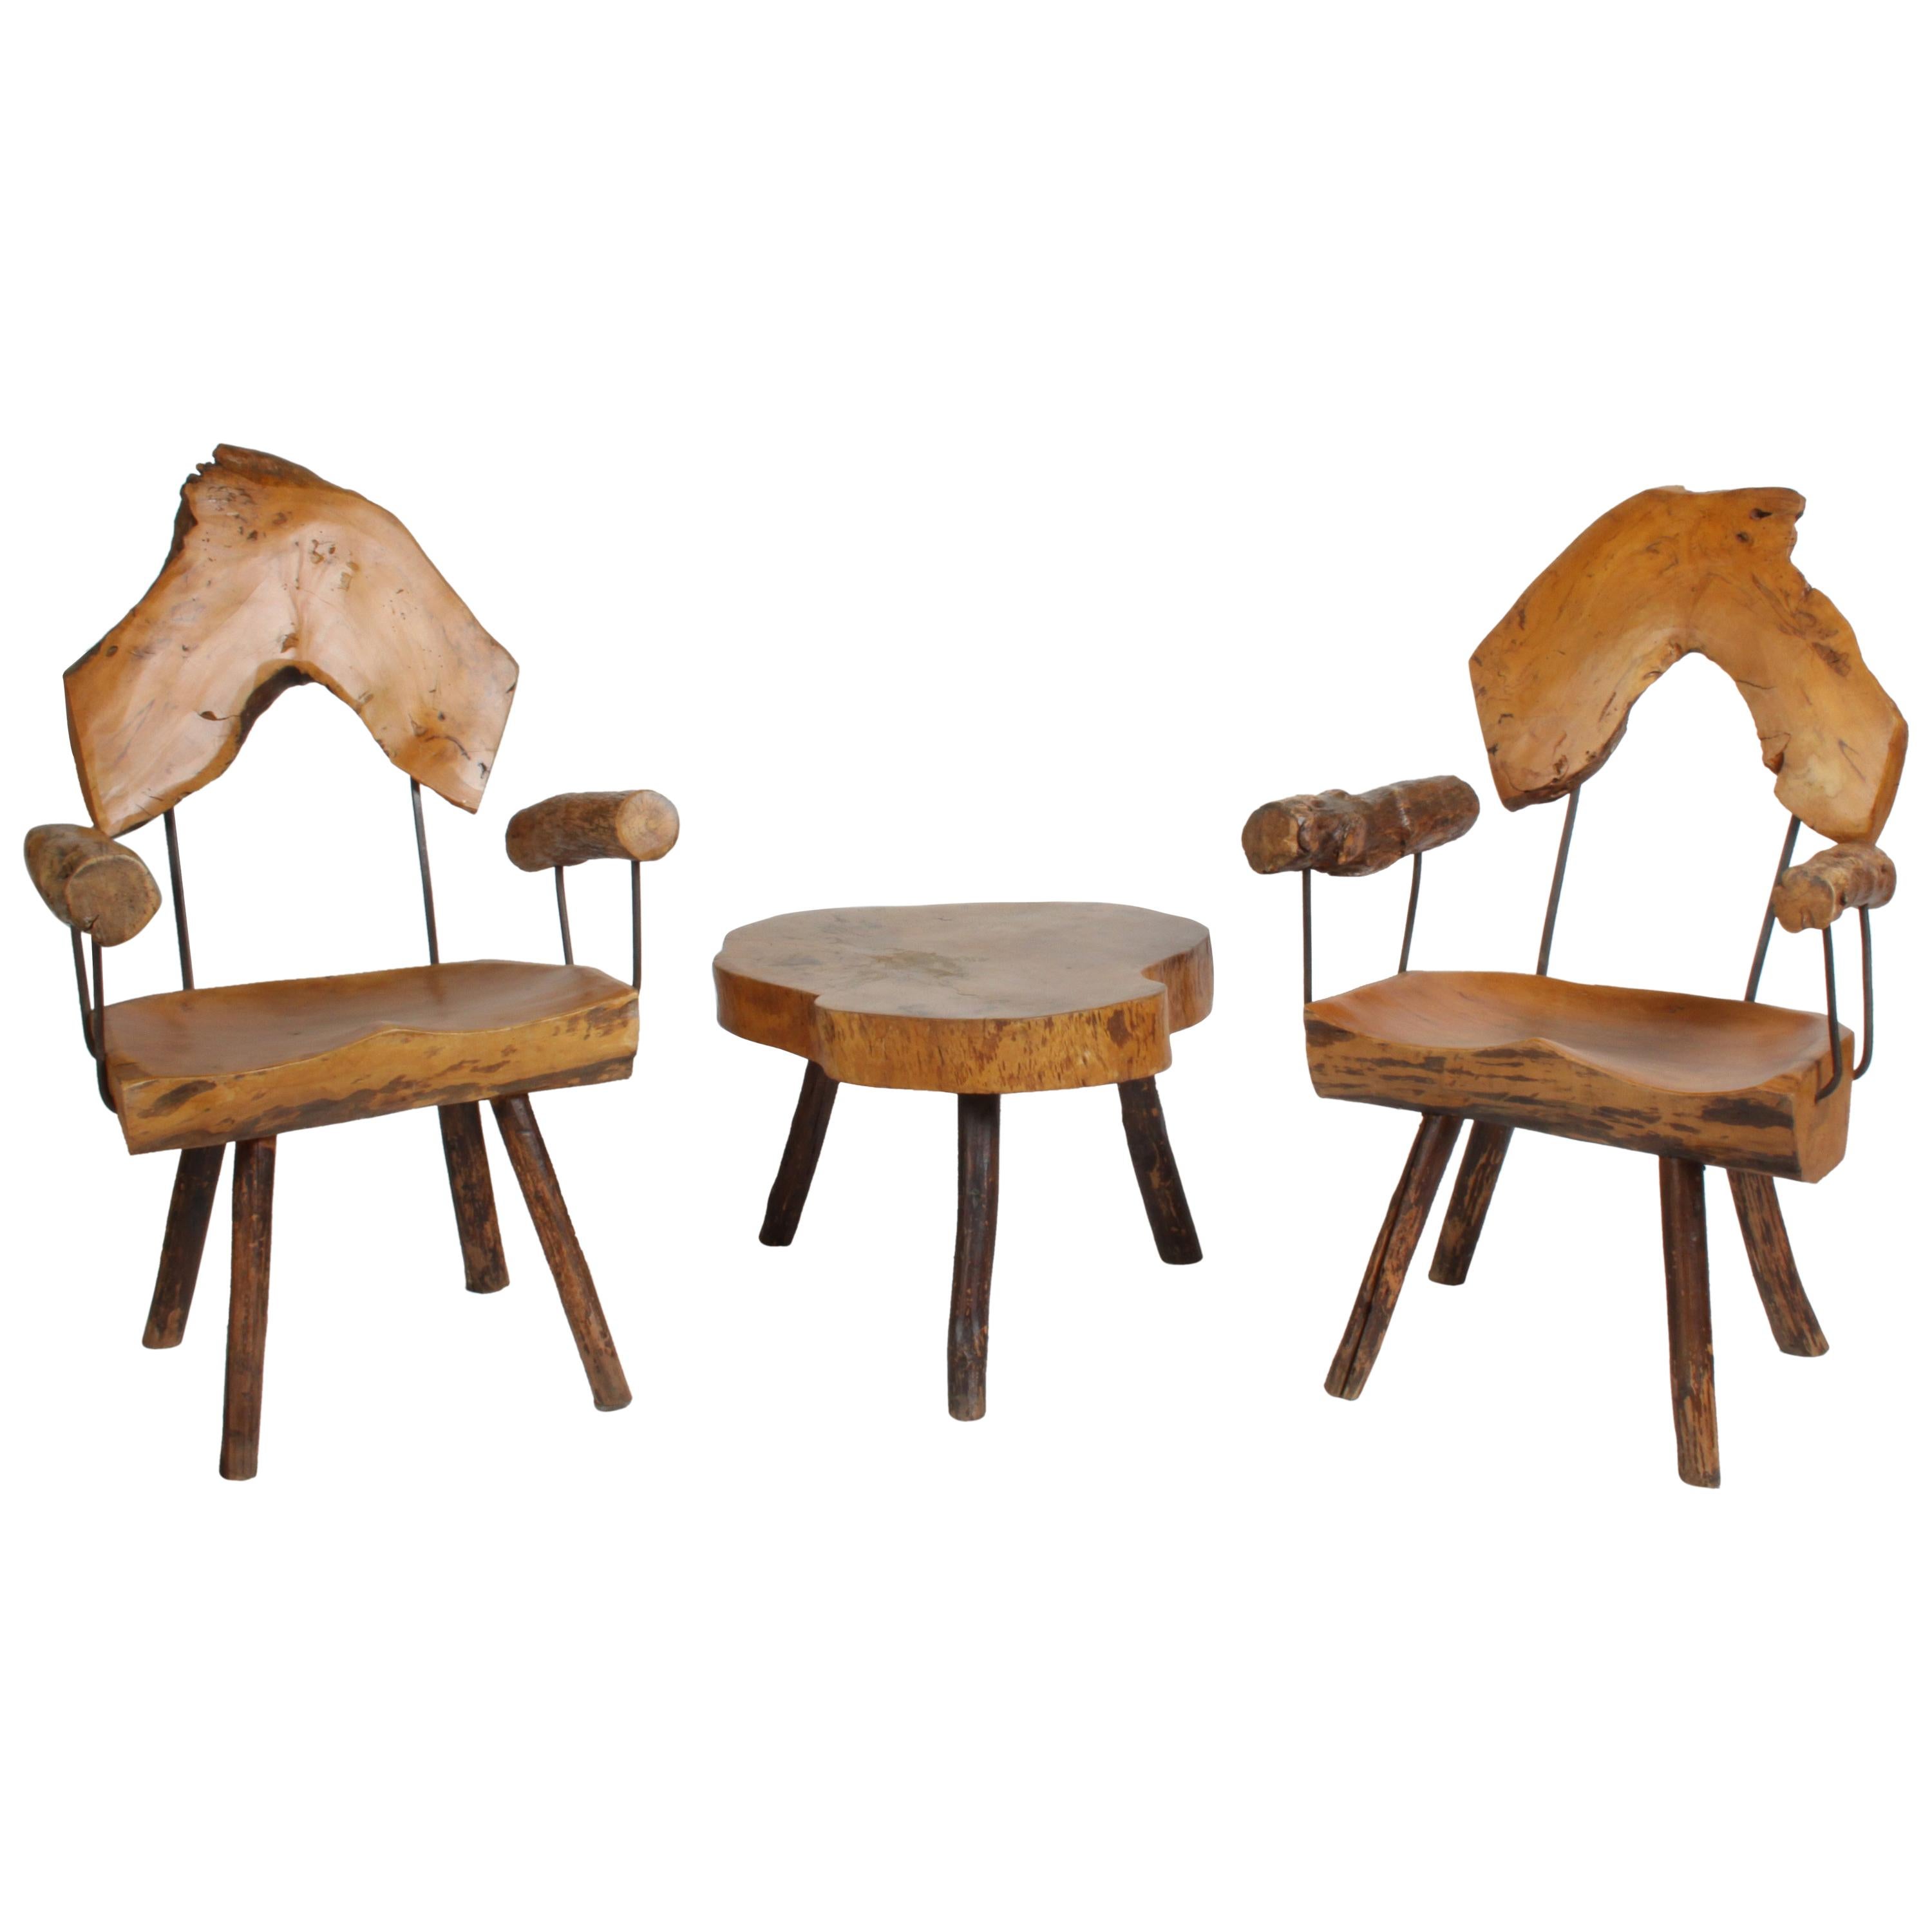 Pair of Unique Organic / Rustic Midcentury Log Chairs with Side Table